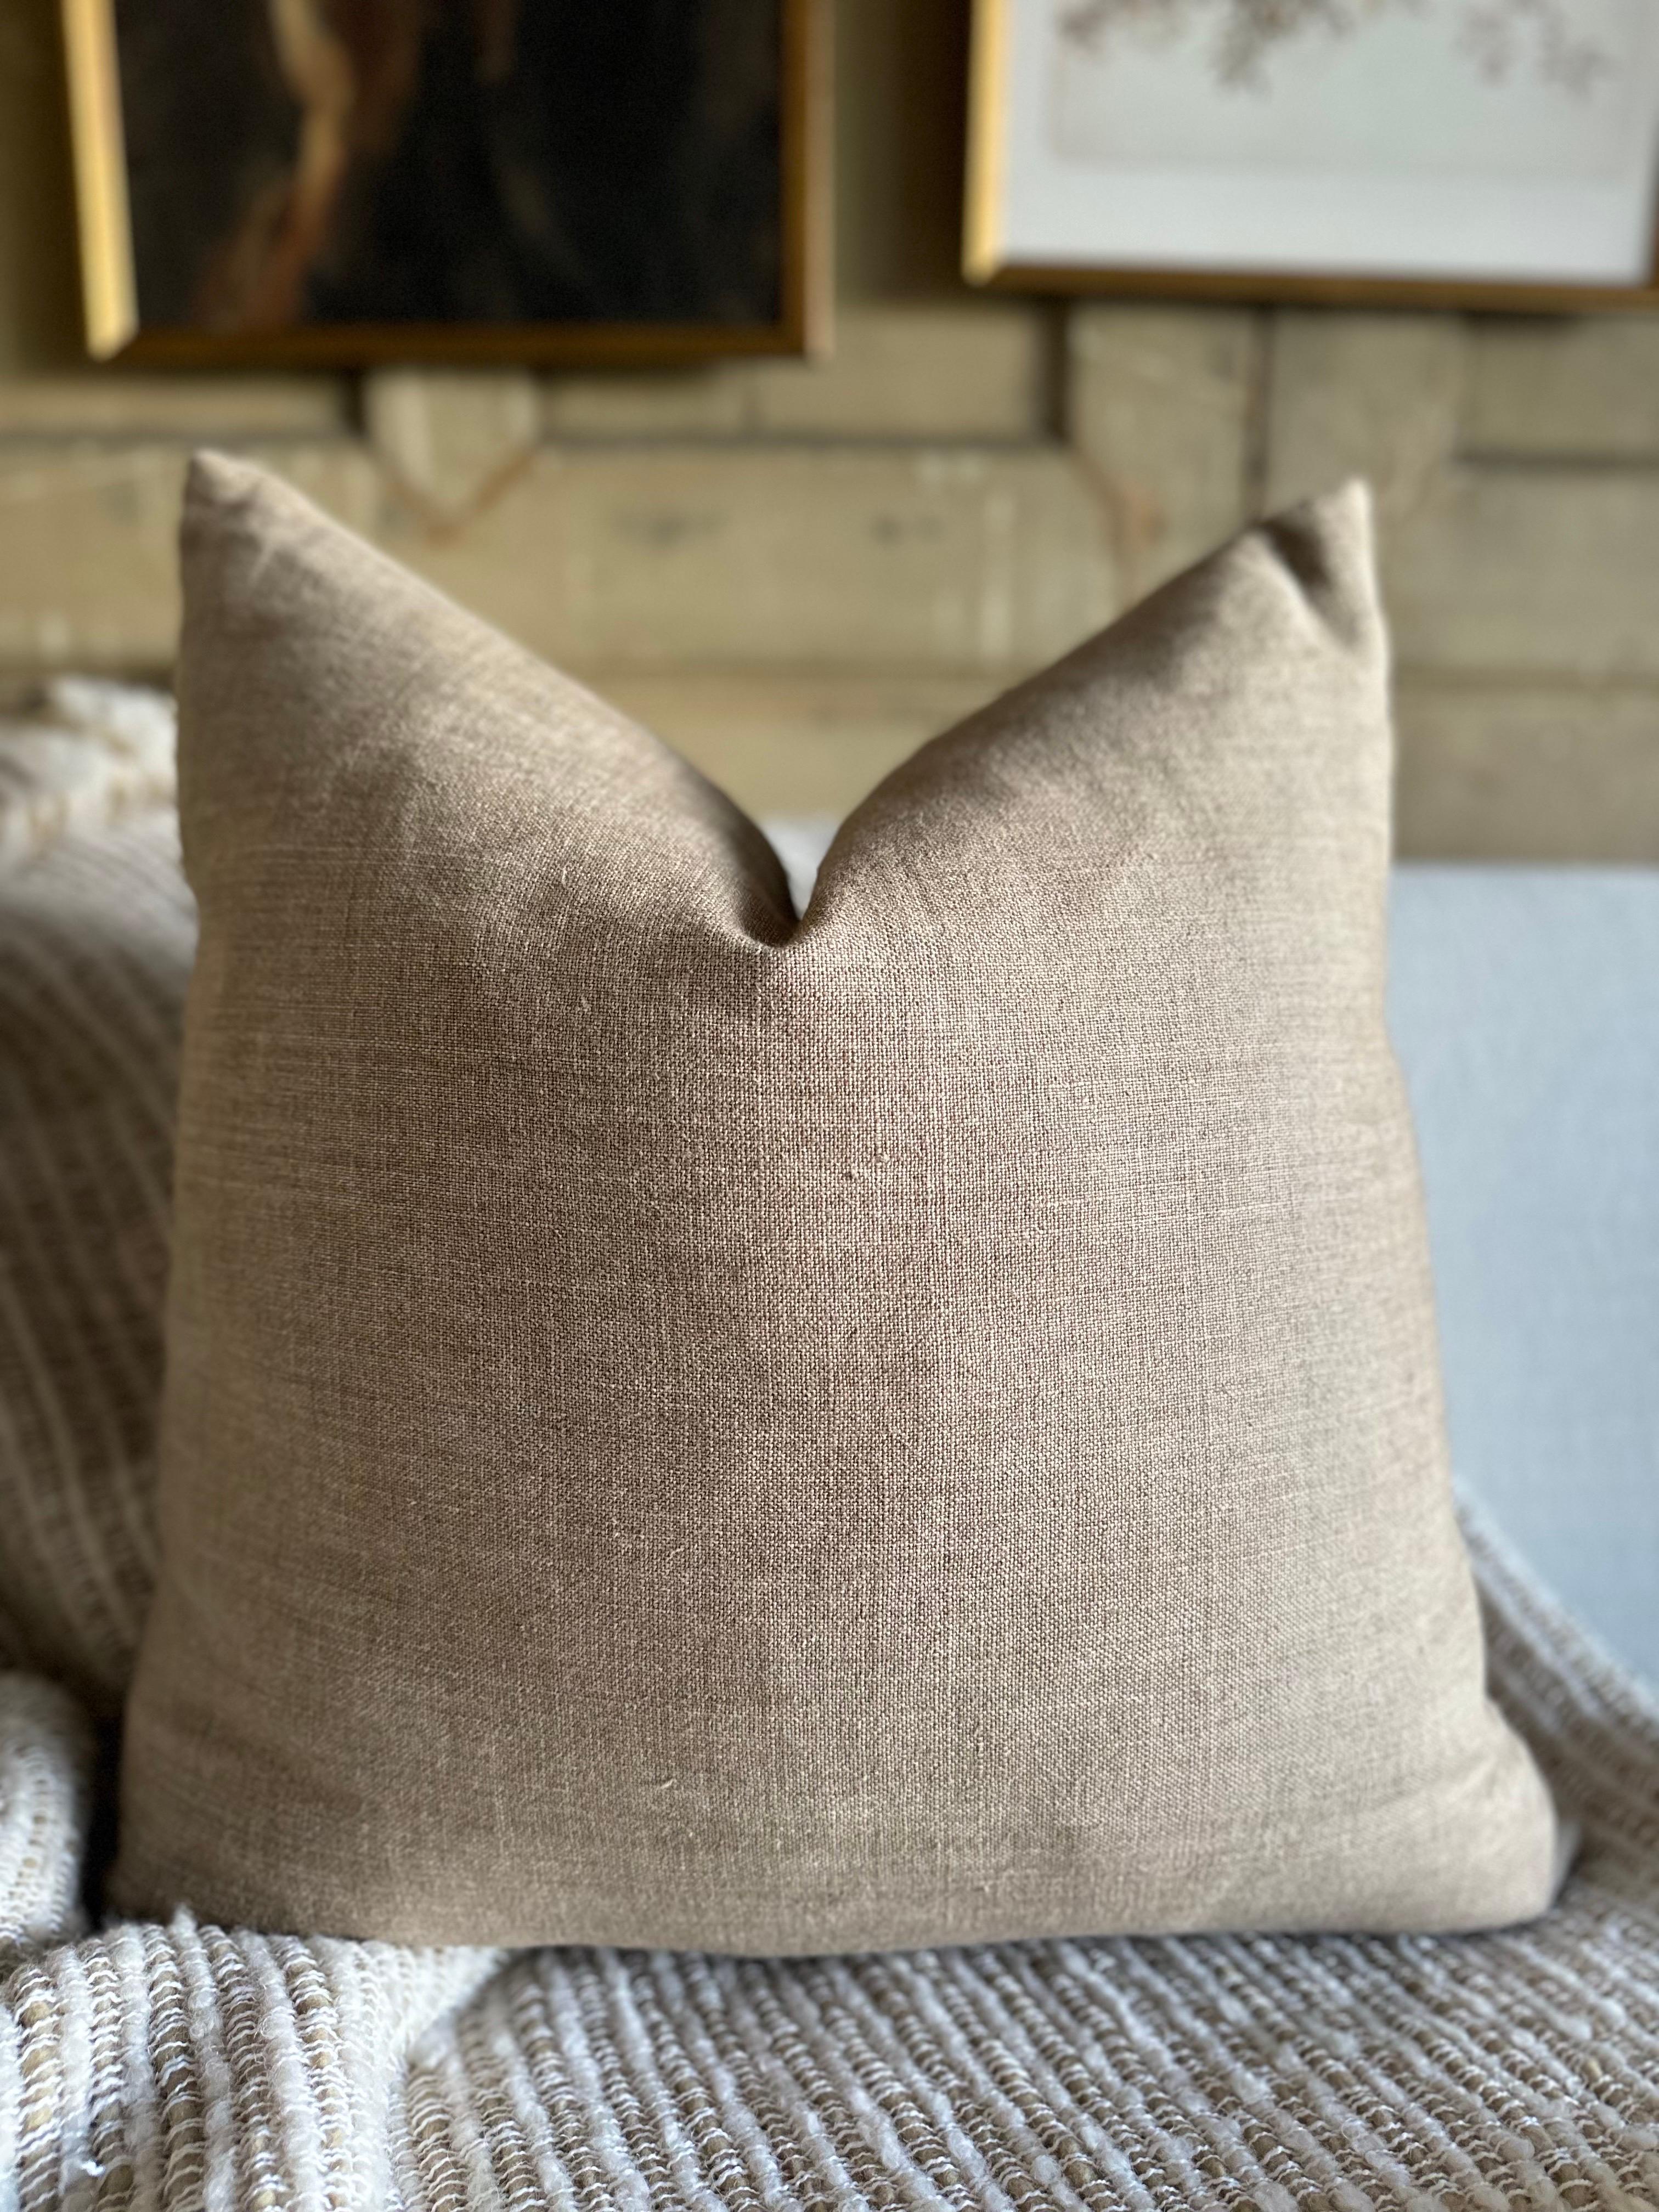 Linen pillow in a coco brown color with a wash finish.
Antique Brass Zipper closure
Overlocked seams.
Includes Down Feather Insert
Color: coco brown
Size: 22x22
51,000 Double Rubs
Extremely soft to the hand.
Care: Can be machine washed, dry cleaning